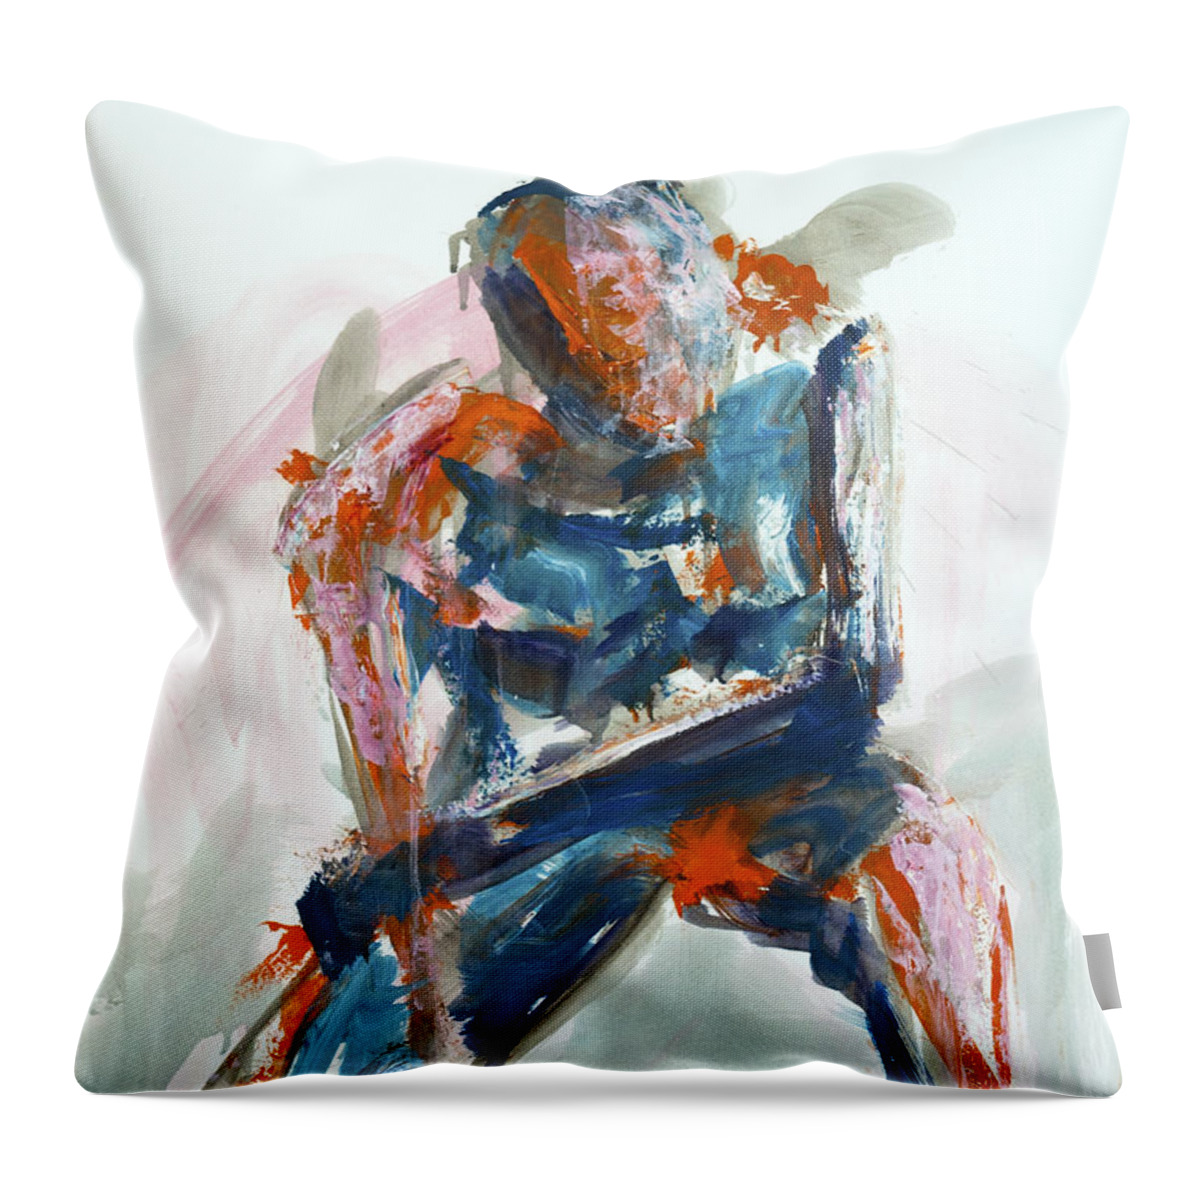 Gesture Throw Pillow featuring the painting 04954 Athlete by AnneKarin Glass